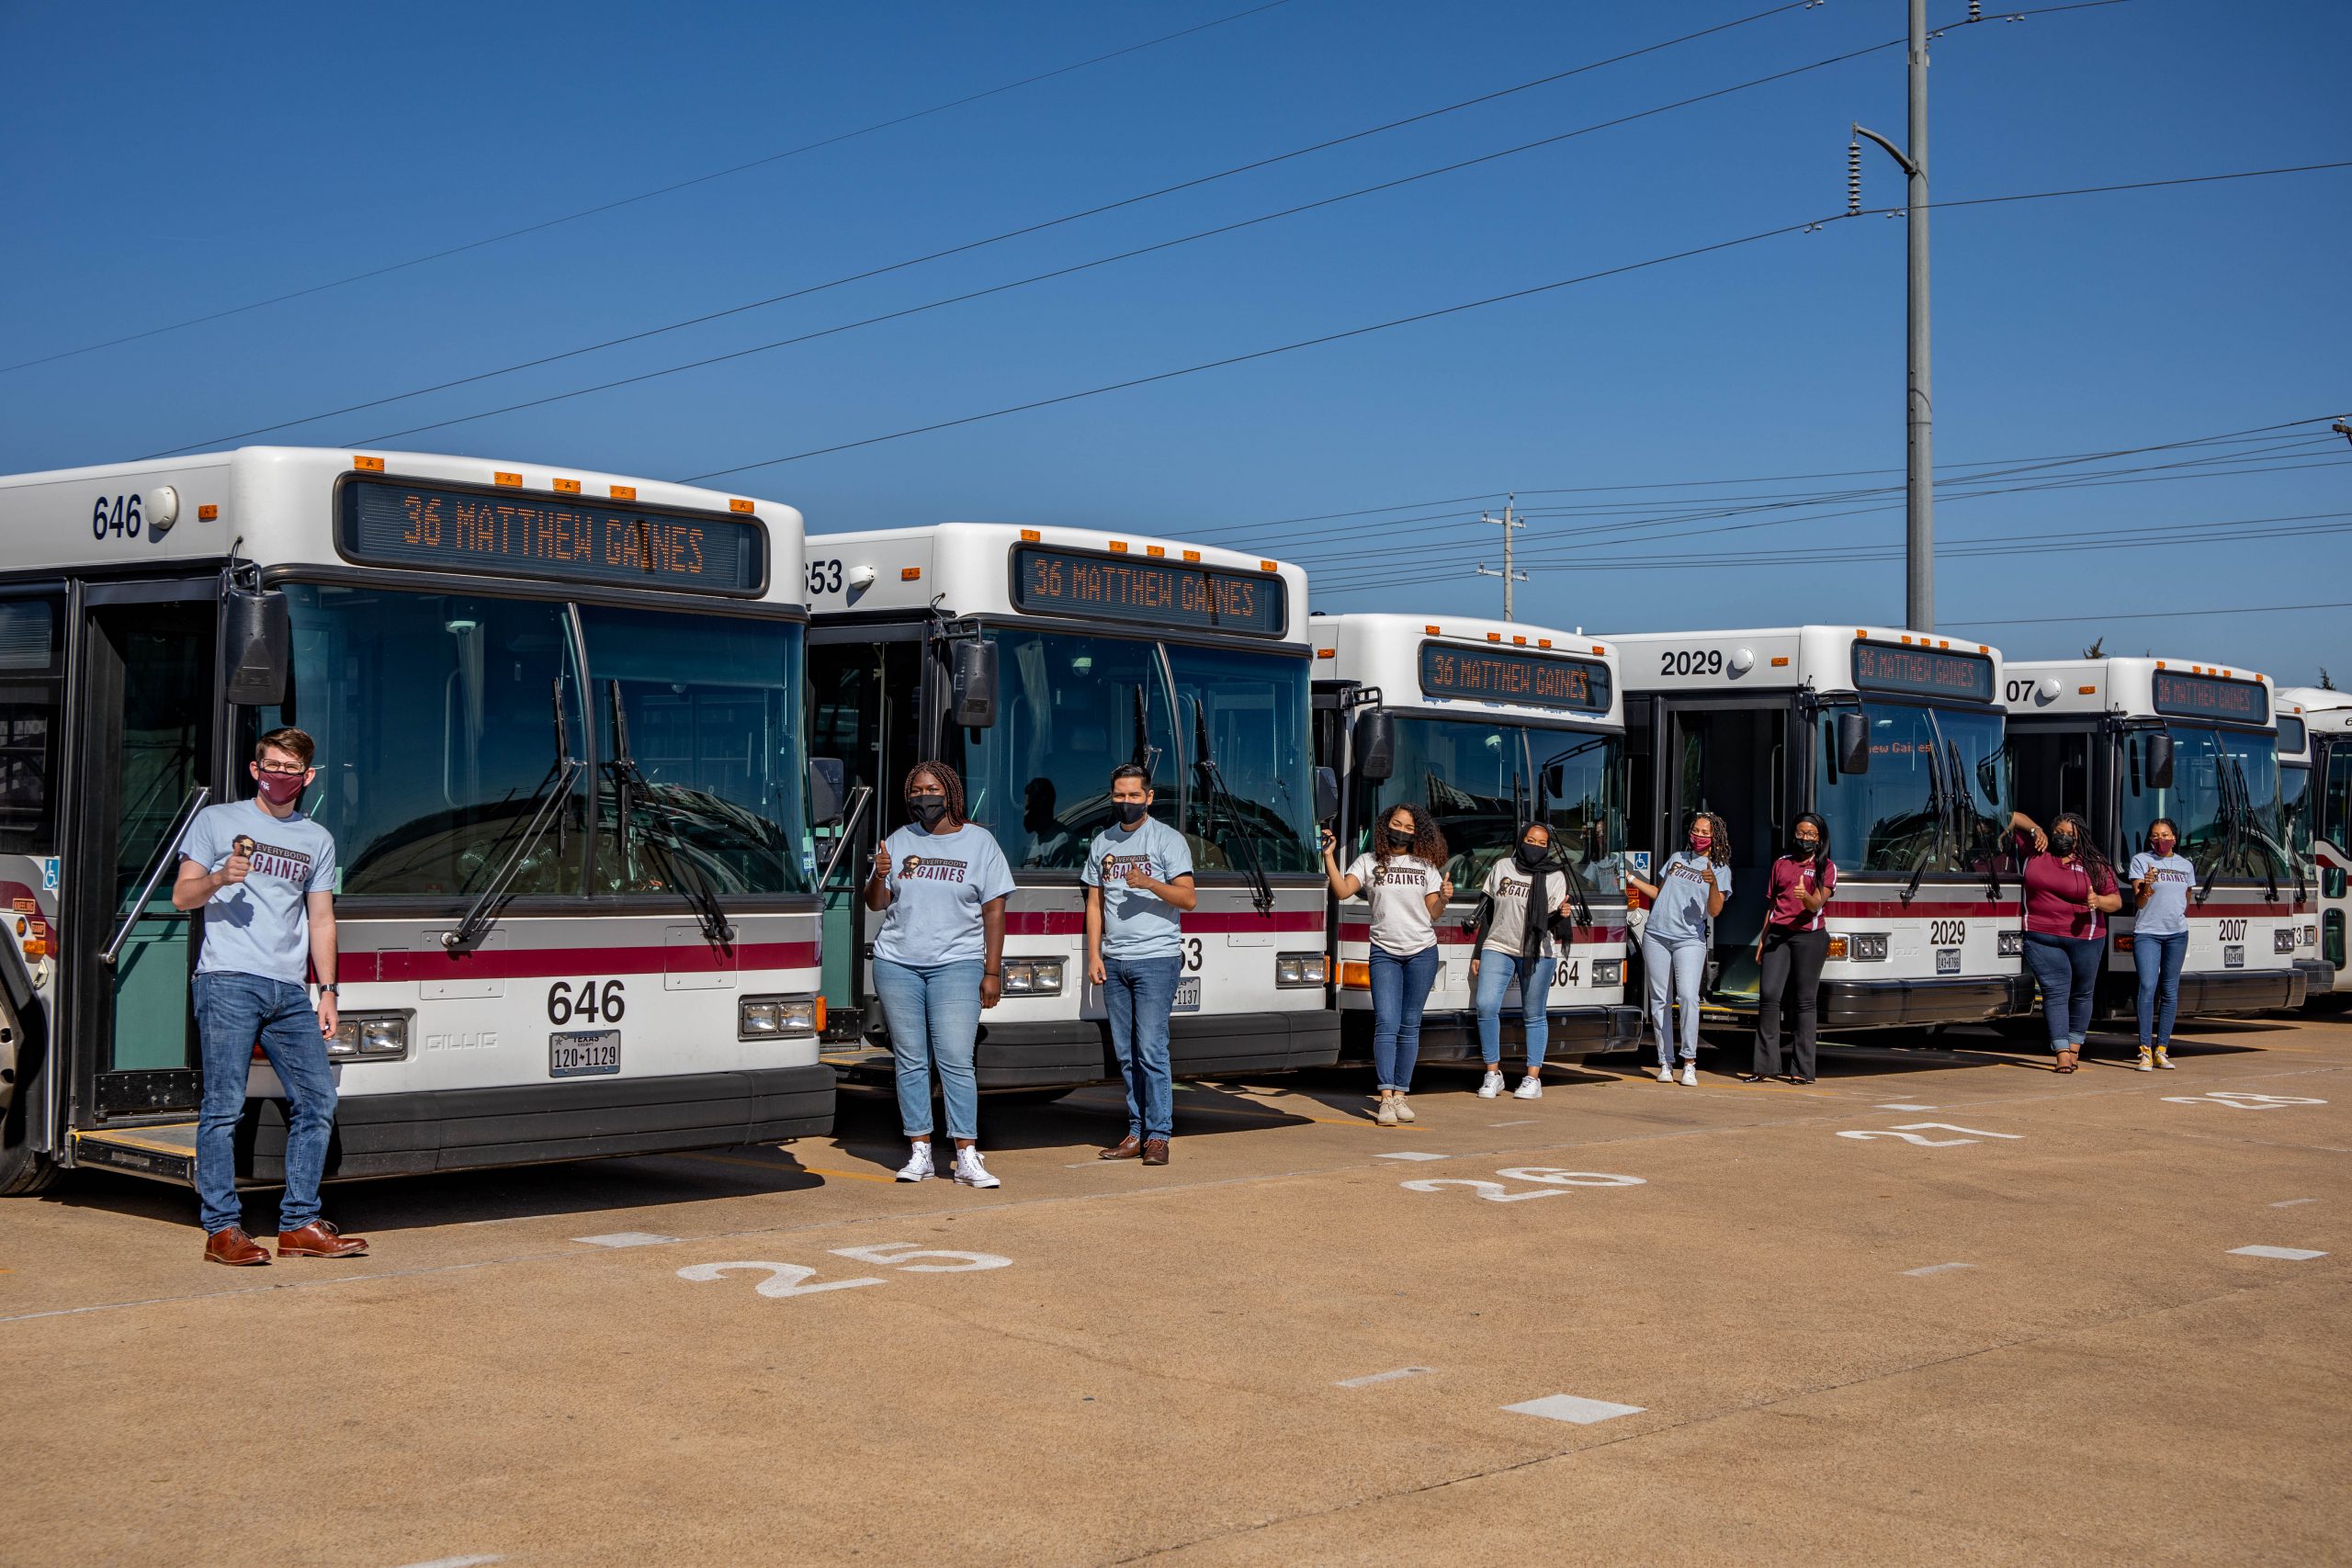 Image of the Matthew Gaines Society in front of a row of Aggie Spirit Buses displaying the newly named Matthew Gaines route on the bus marquees.